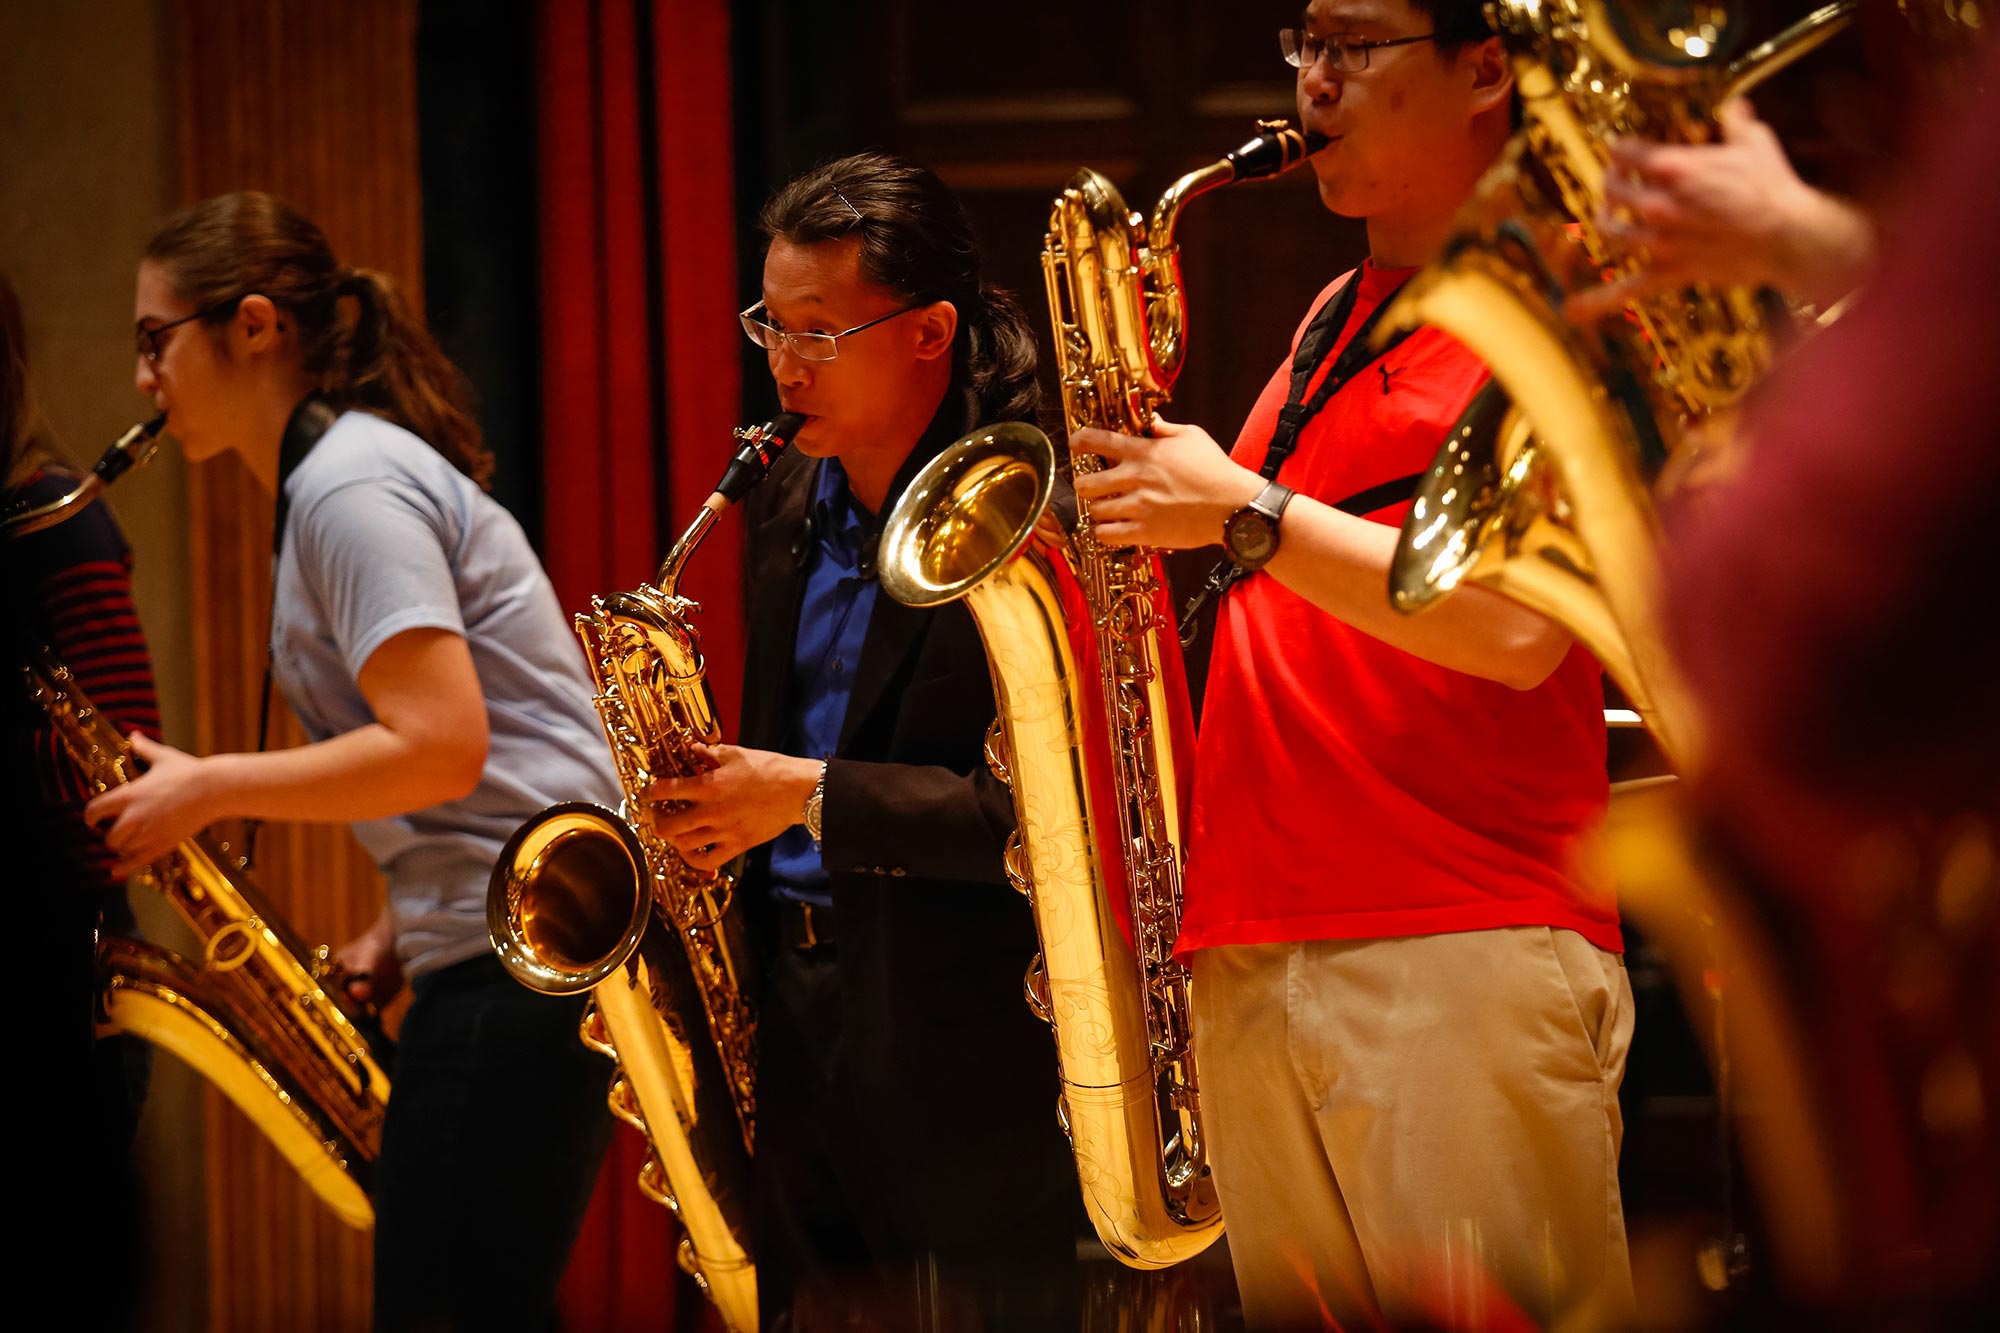 “There are very few places in the country—if any—doing things at the level that the Eastman Saxophone Project is doing them,” says LSU’s Griffin Campbell.